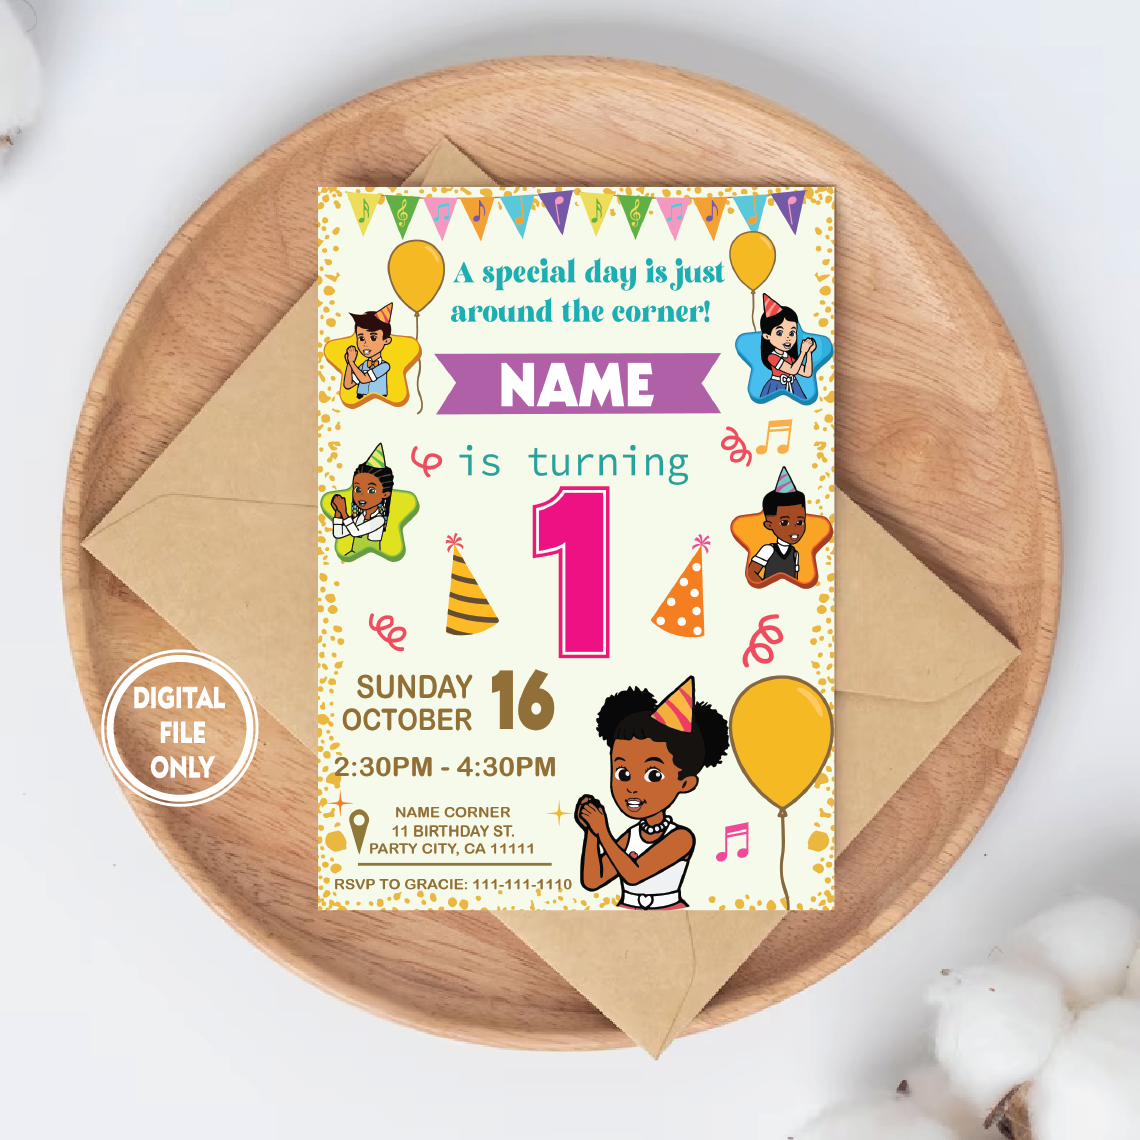 Personalized File Kids Digital Birthday Invitation, Gracies Corner Party Invitation, Gracie's Corner Birthday Invitation, Gracies Corner svg, svg, png, dxf PNG File Only